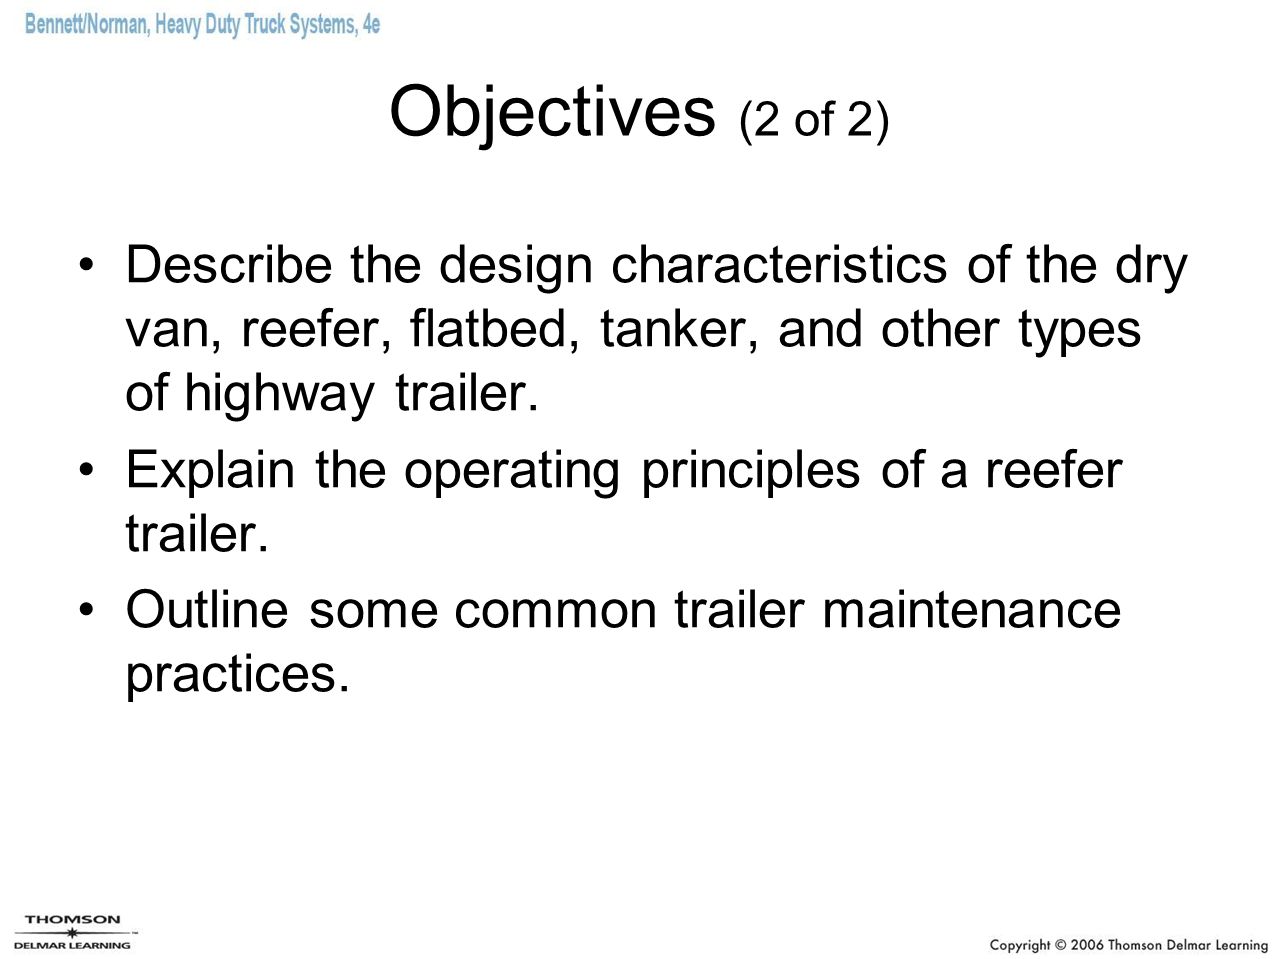 Objectives (2 of 2) Describe the design characteristics of the dry van, reefer, flatbed, tanker, and other types of highway trailer.